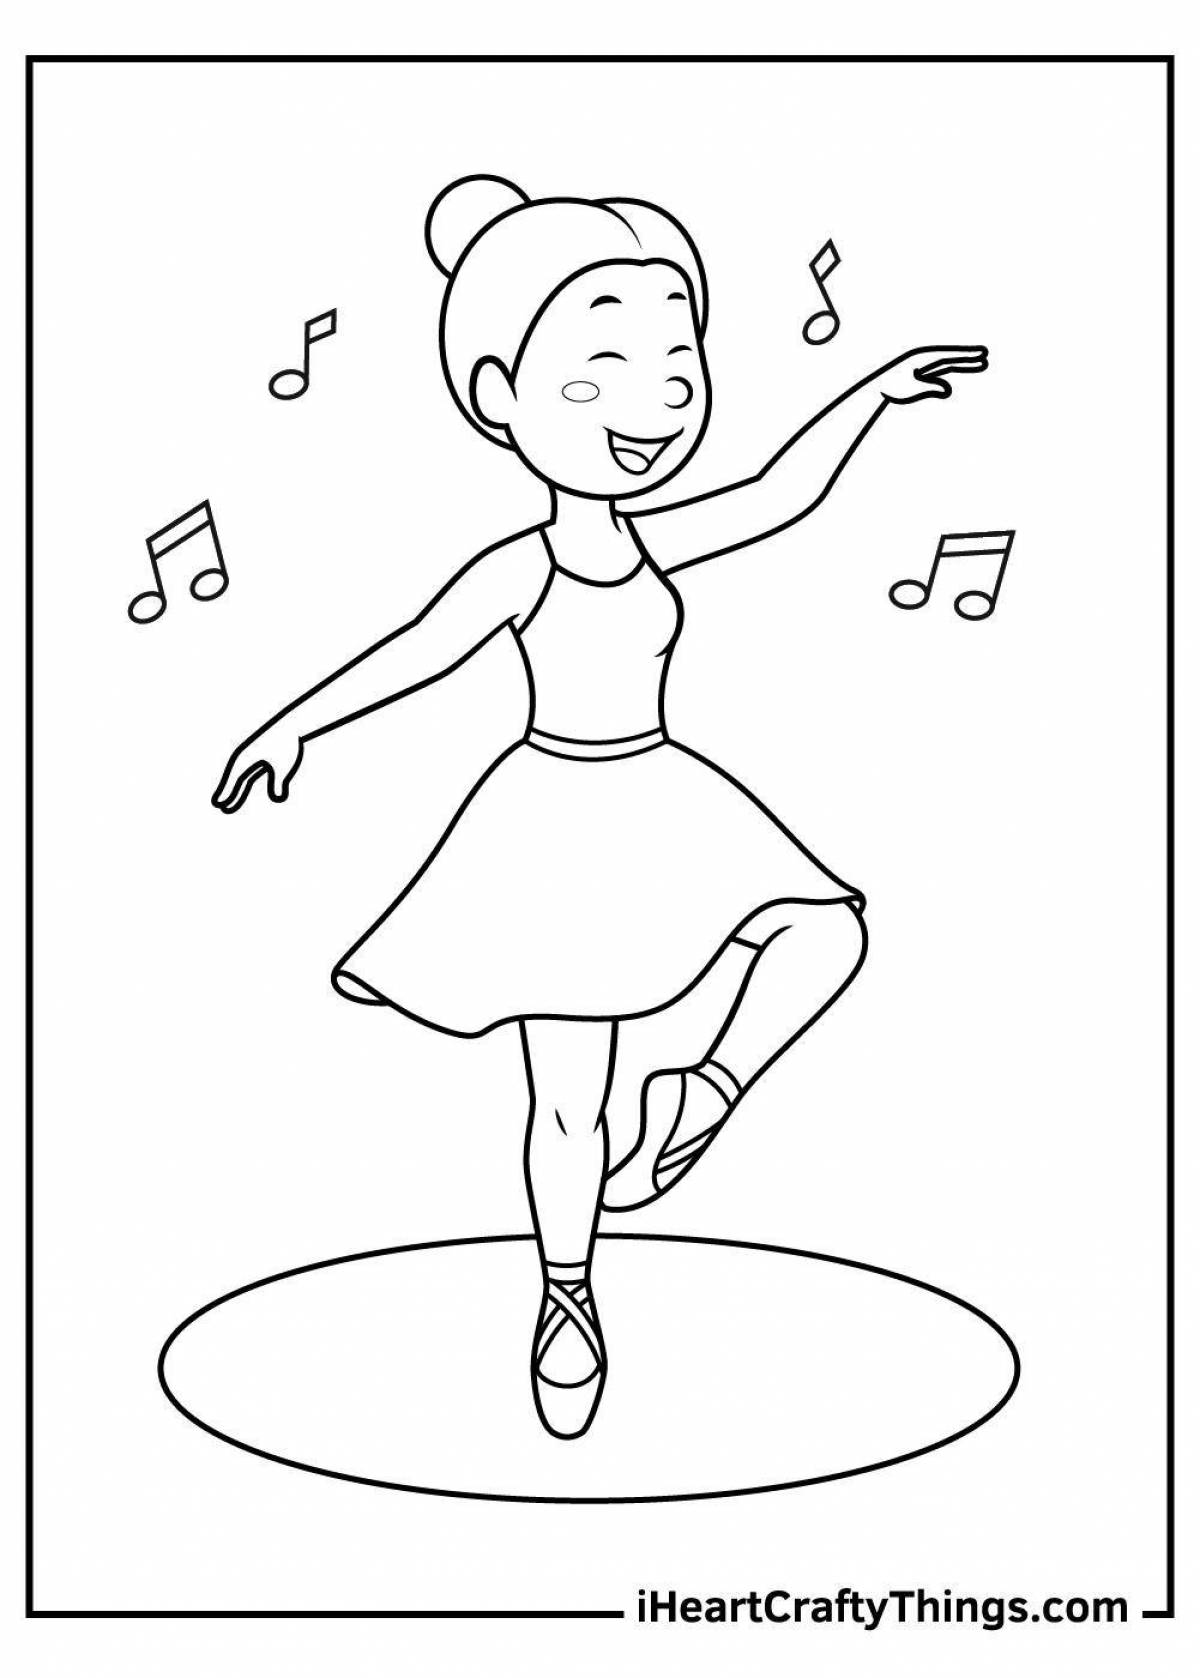 Exciting dancer coloring book